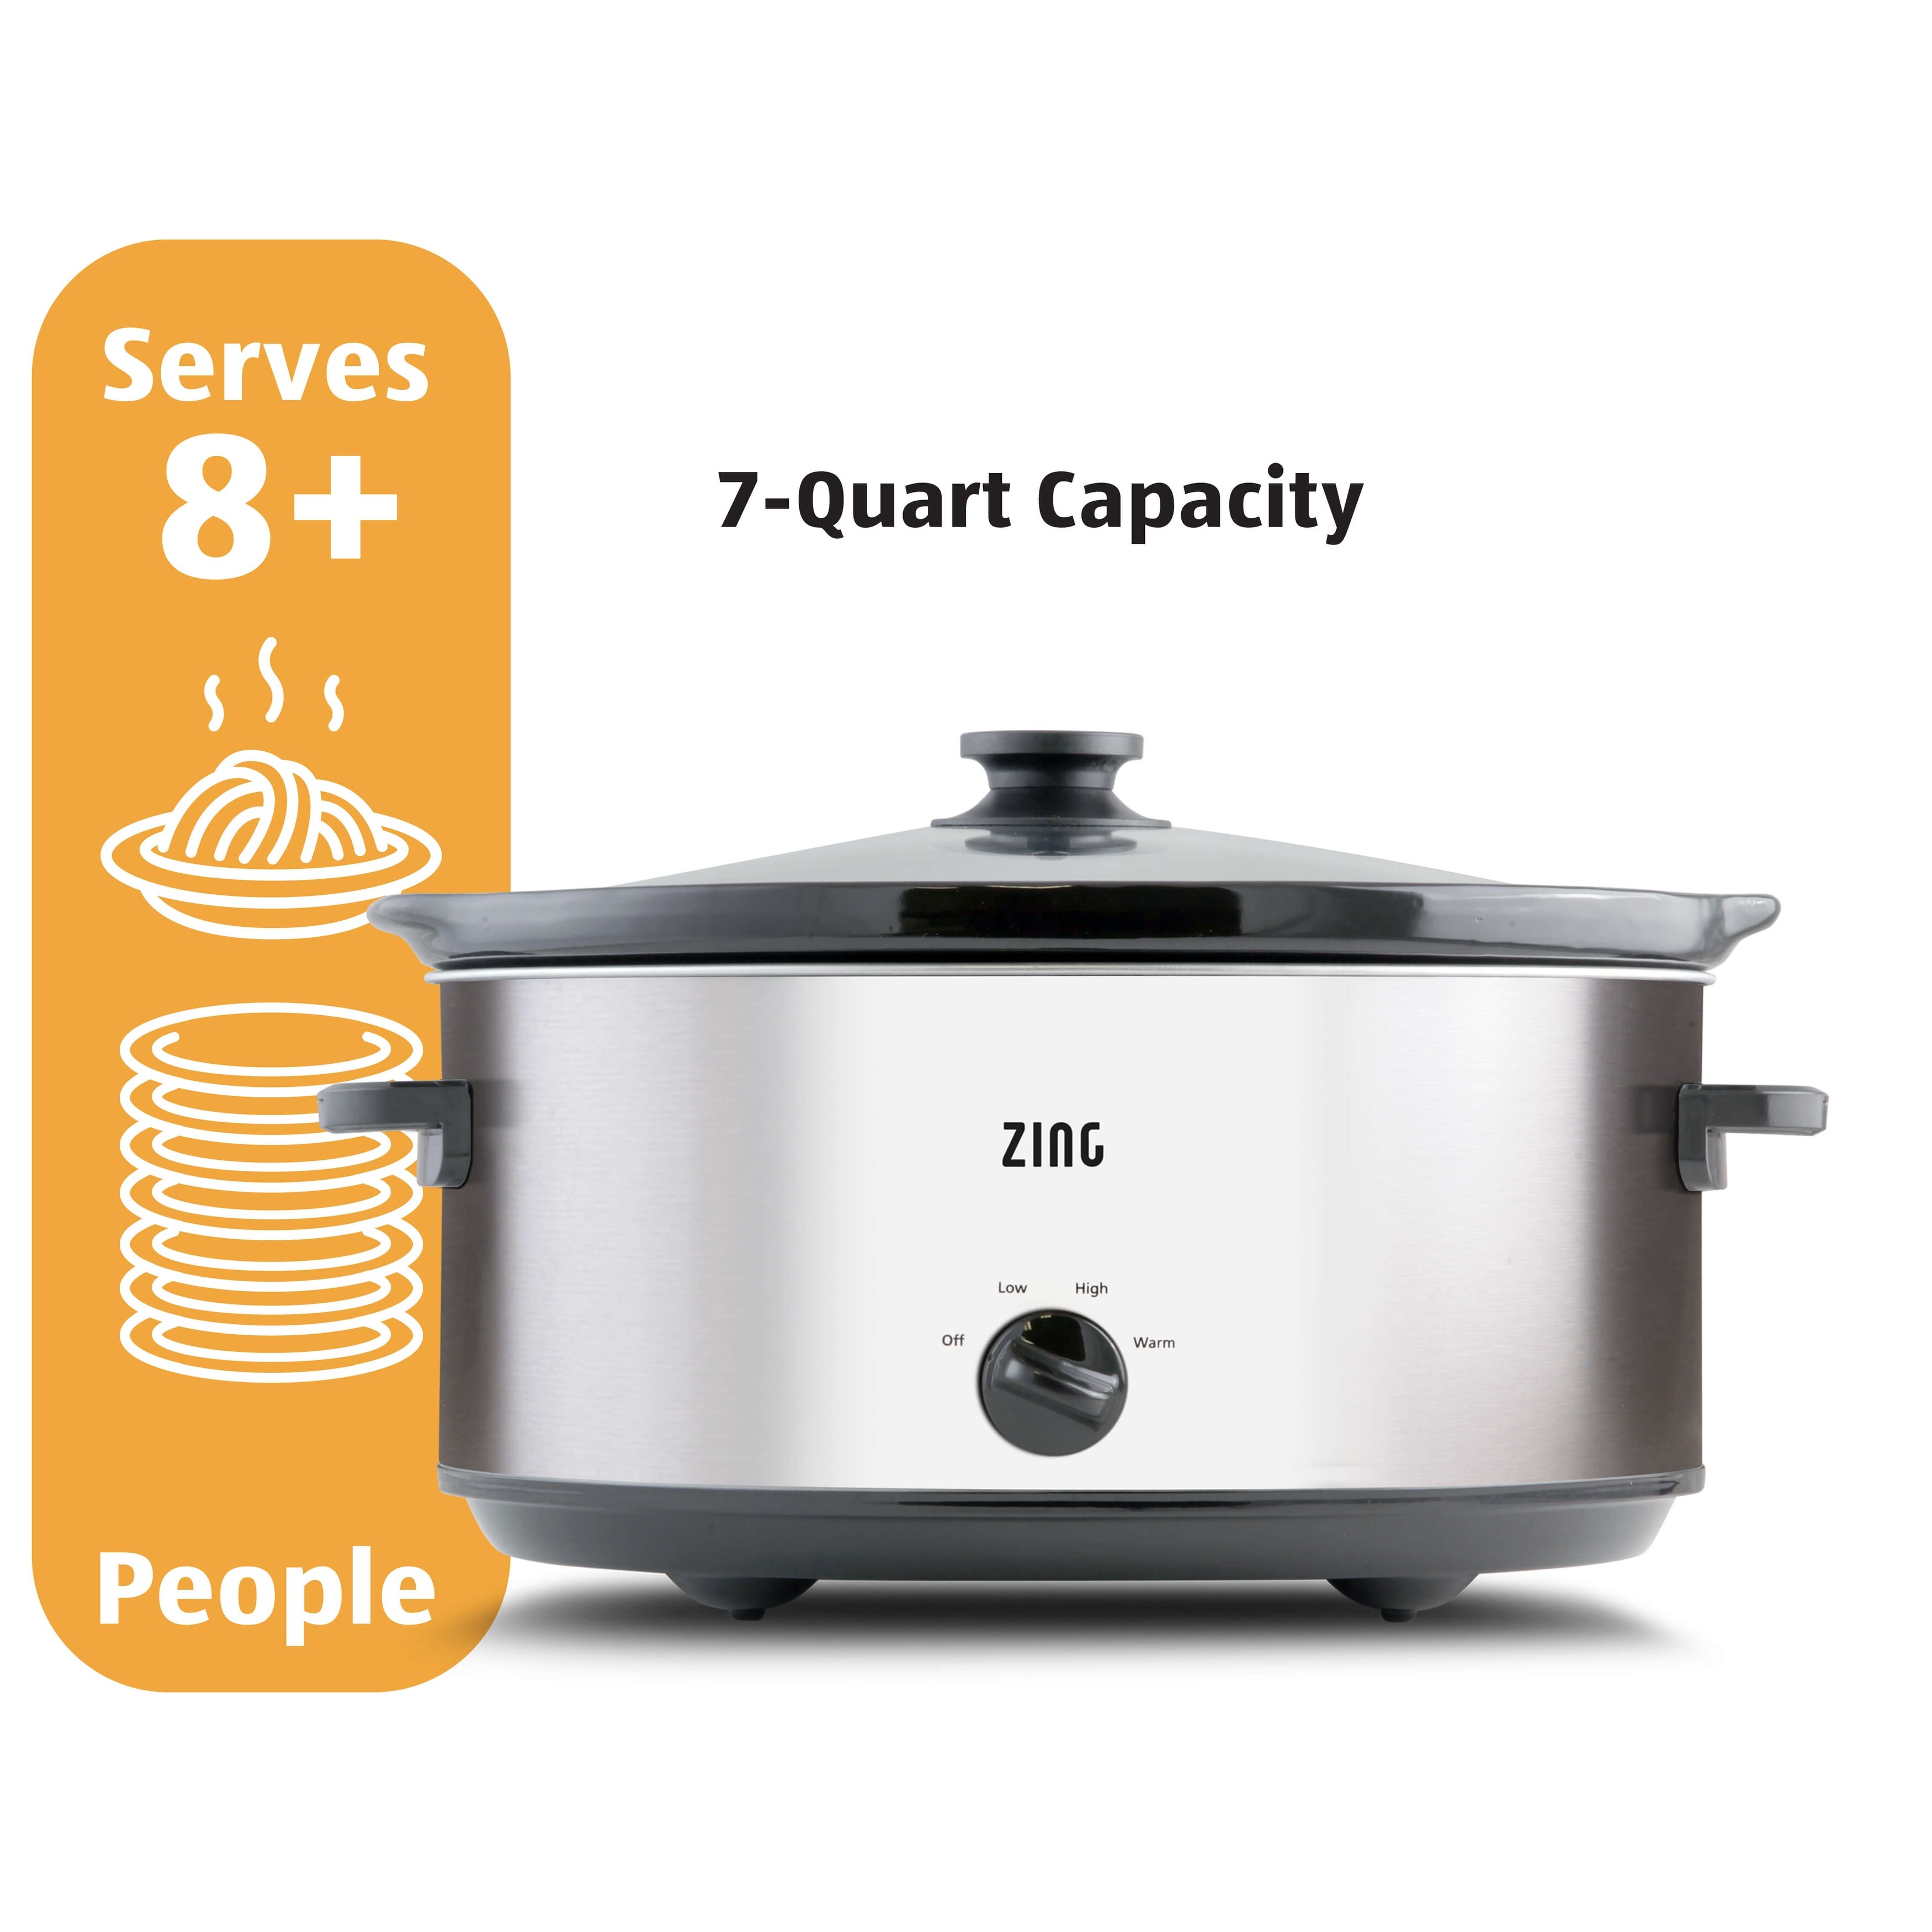 https://ak1.ostkcdn.com/images/products/is/images/direct/9eb02cf97e45f81d3dfbad7763d2a41eda00f23b/Zing-7-Quart-Manual-Oval-Slow-Cooker.jpg